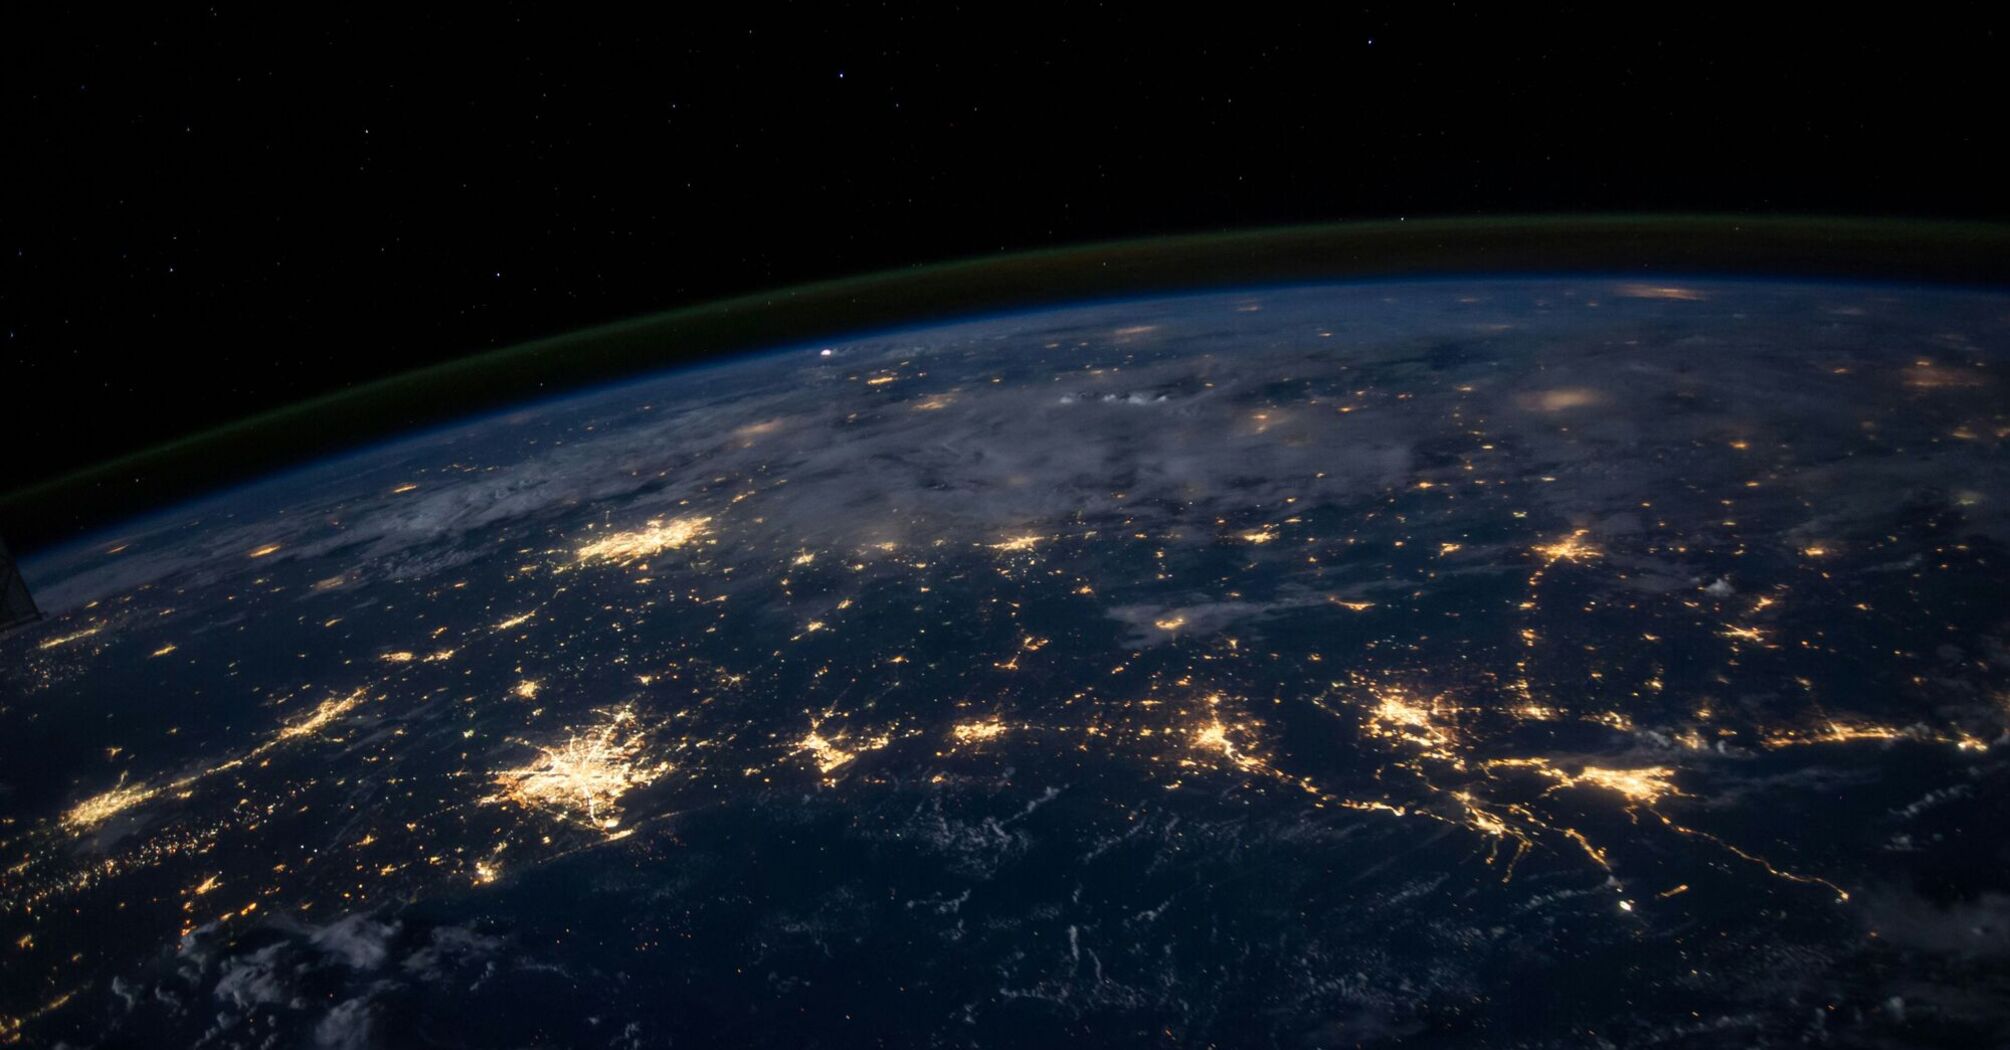 Earth from space at night, showing the illuminated outlines of continents with city lights against the dark backdrop of the atmosphere